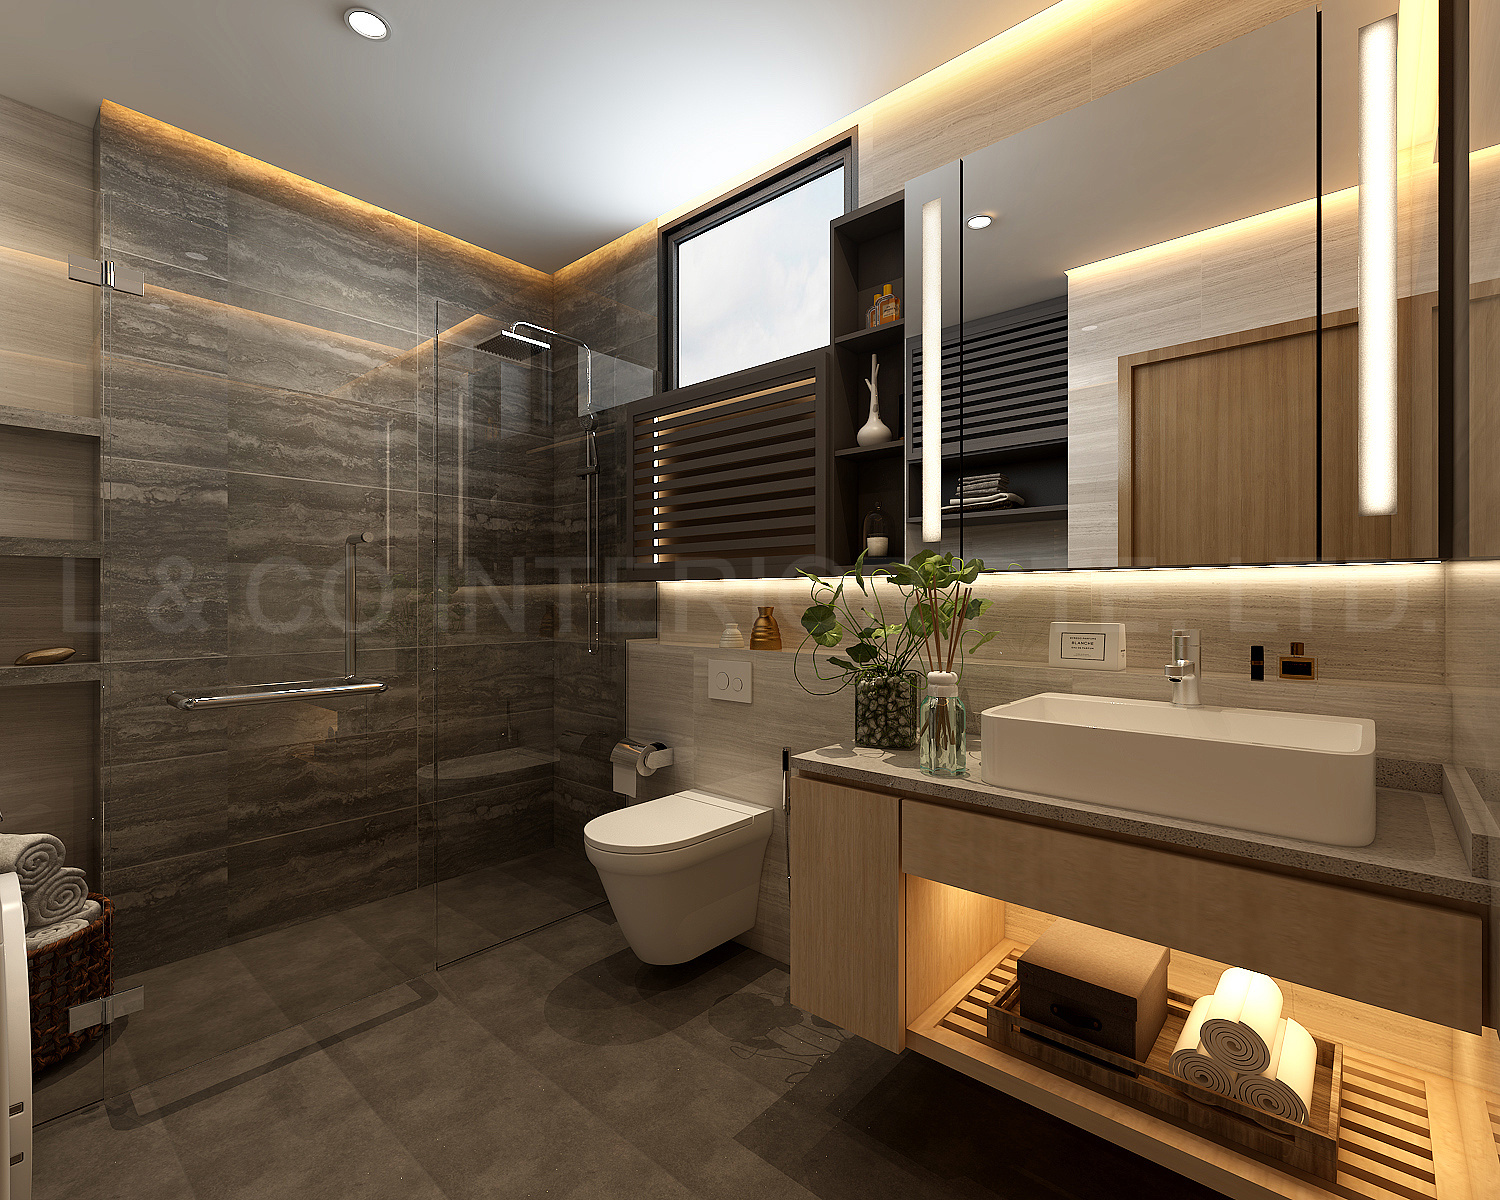 Hillview - 1270sqft by L &amp; Co Interior Pte Ltd. Unit is Condo and follows a Co-Living style.